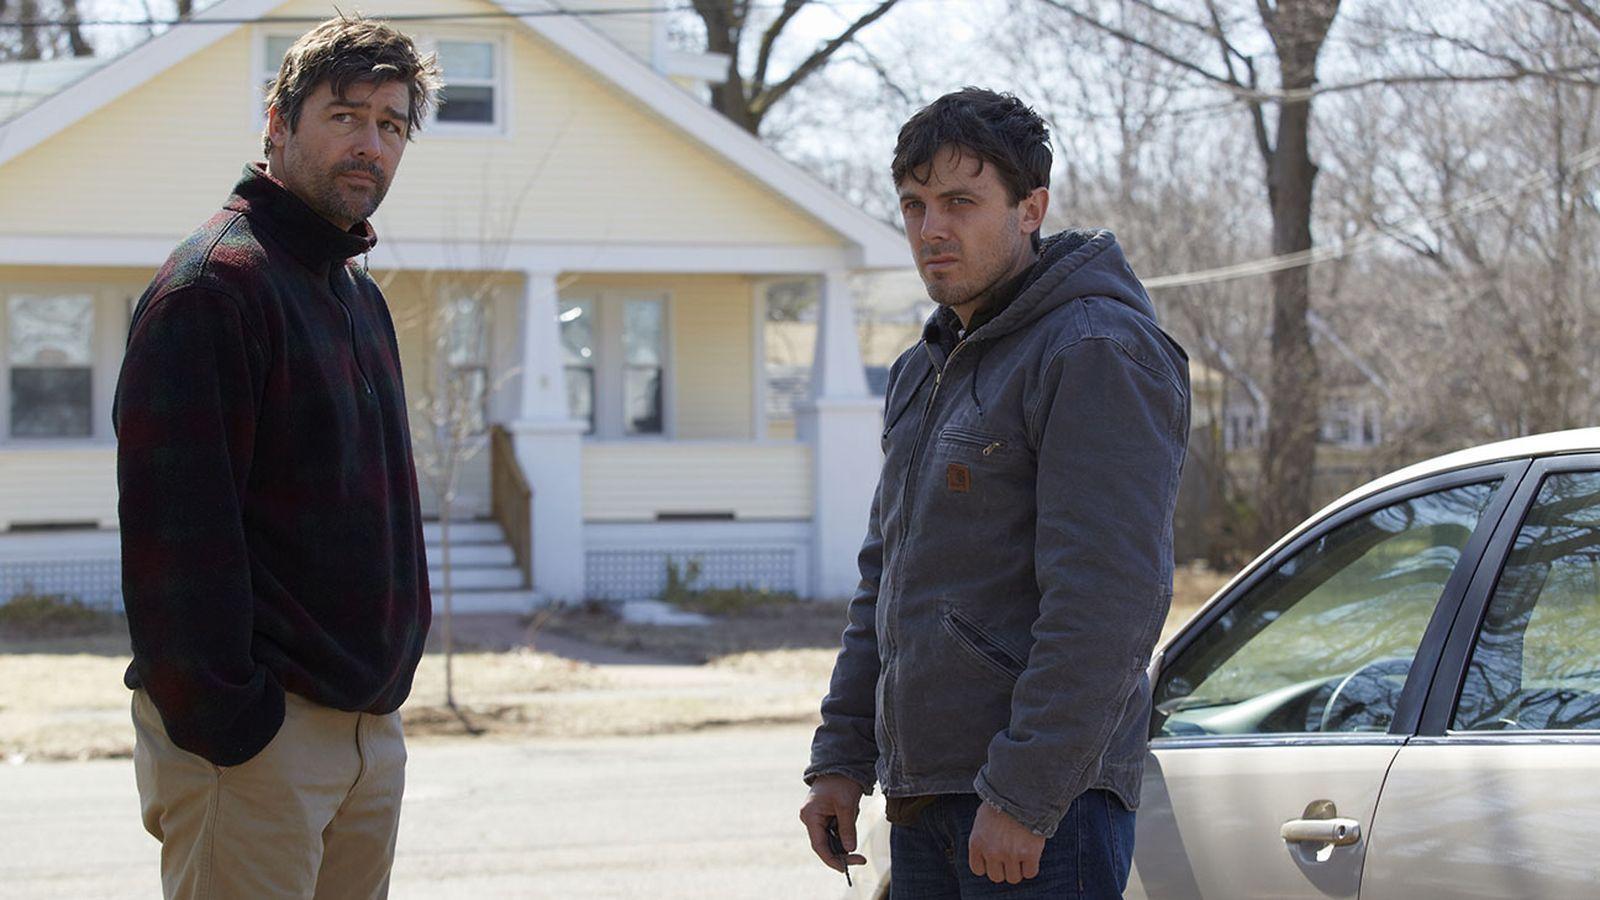 Manchester by the Sea is a beautiful tragedy, and Casey Affleck&;s